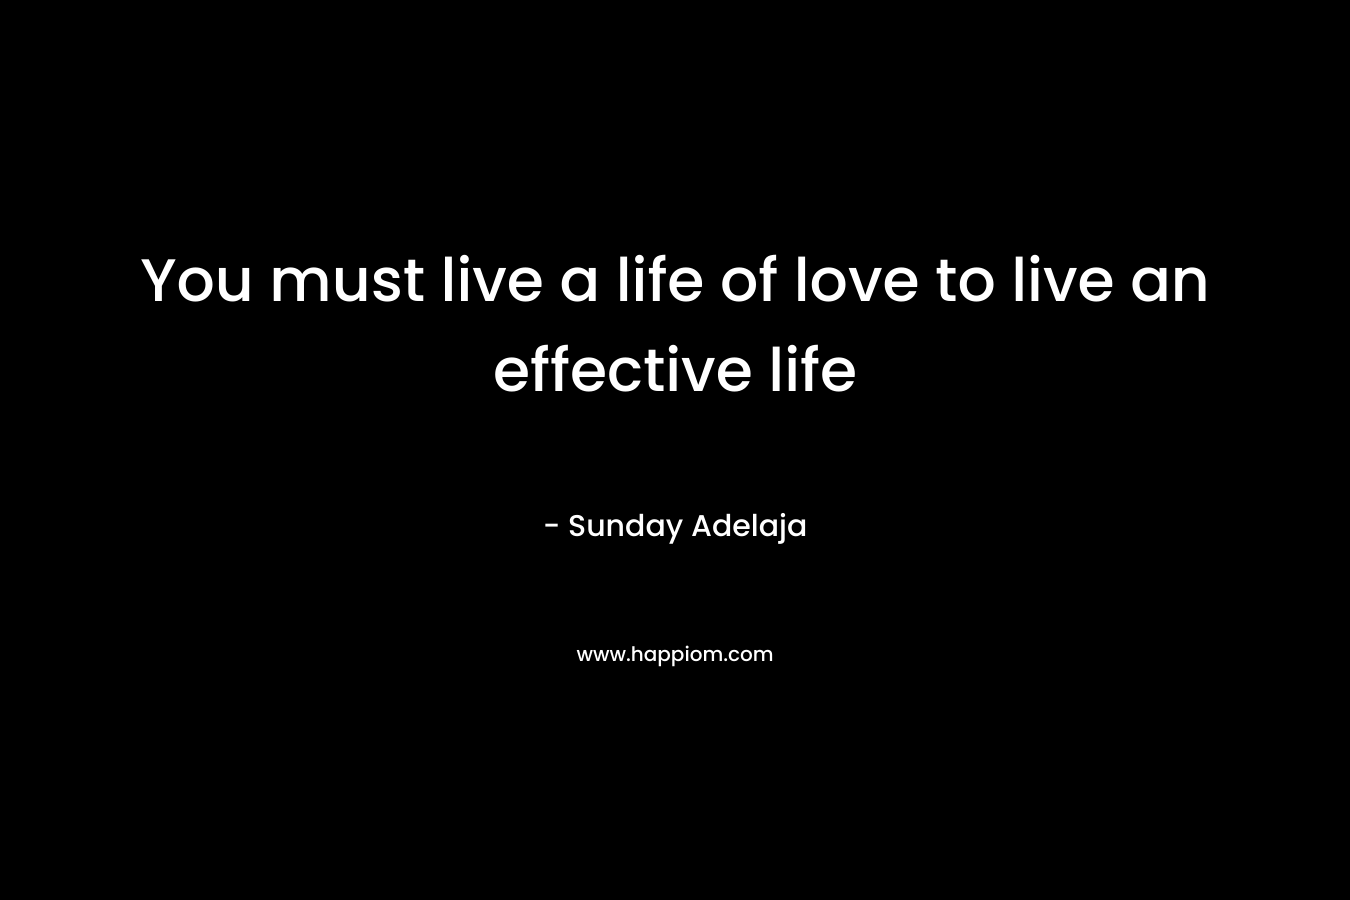 You must live a life of love to live an effective life